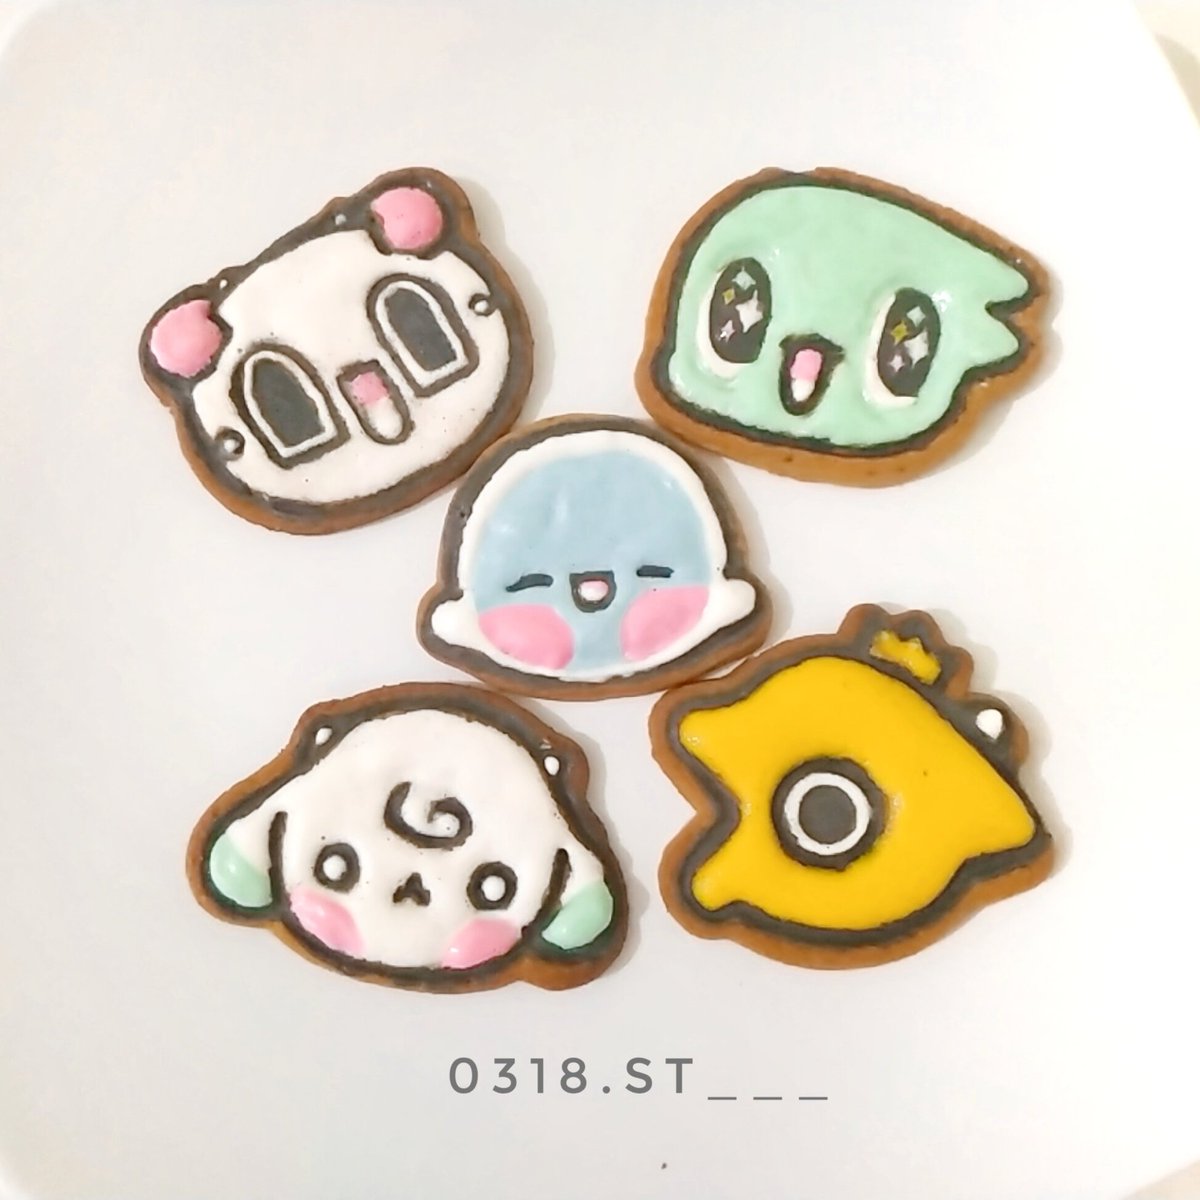 All spoonz cookies finished  a whole day  so tired but having so much fun hhahaa  need to catch up all "content" today  #Spoonz  #스푼즈  #비티  #디아볼  #슬라임  #신디  #핑  #BT  #Diabol  #Slime  #Cindy  #Ping  #뉴이스트  #NUEST  @NUESTNEWS  @withspoonz